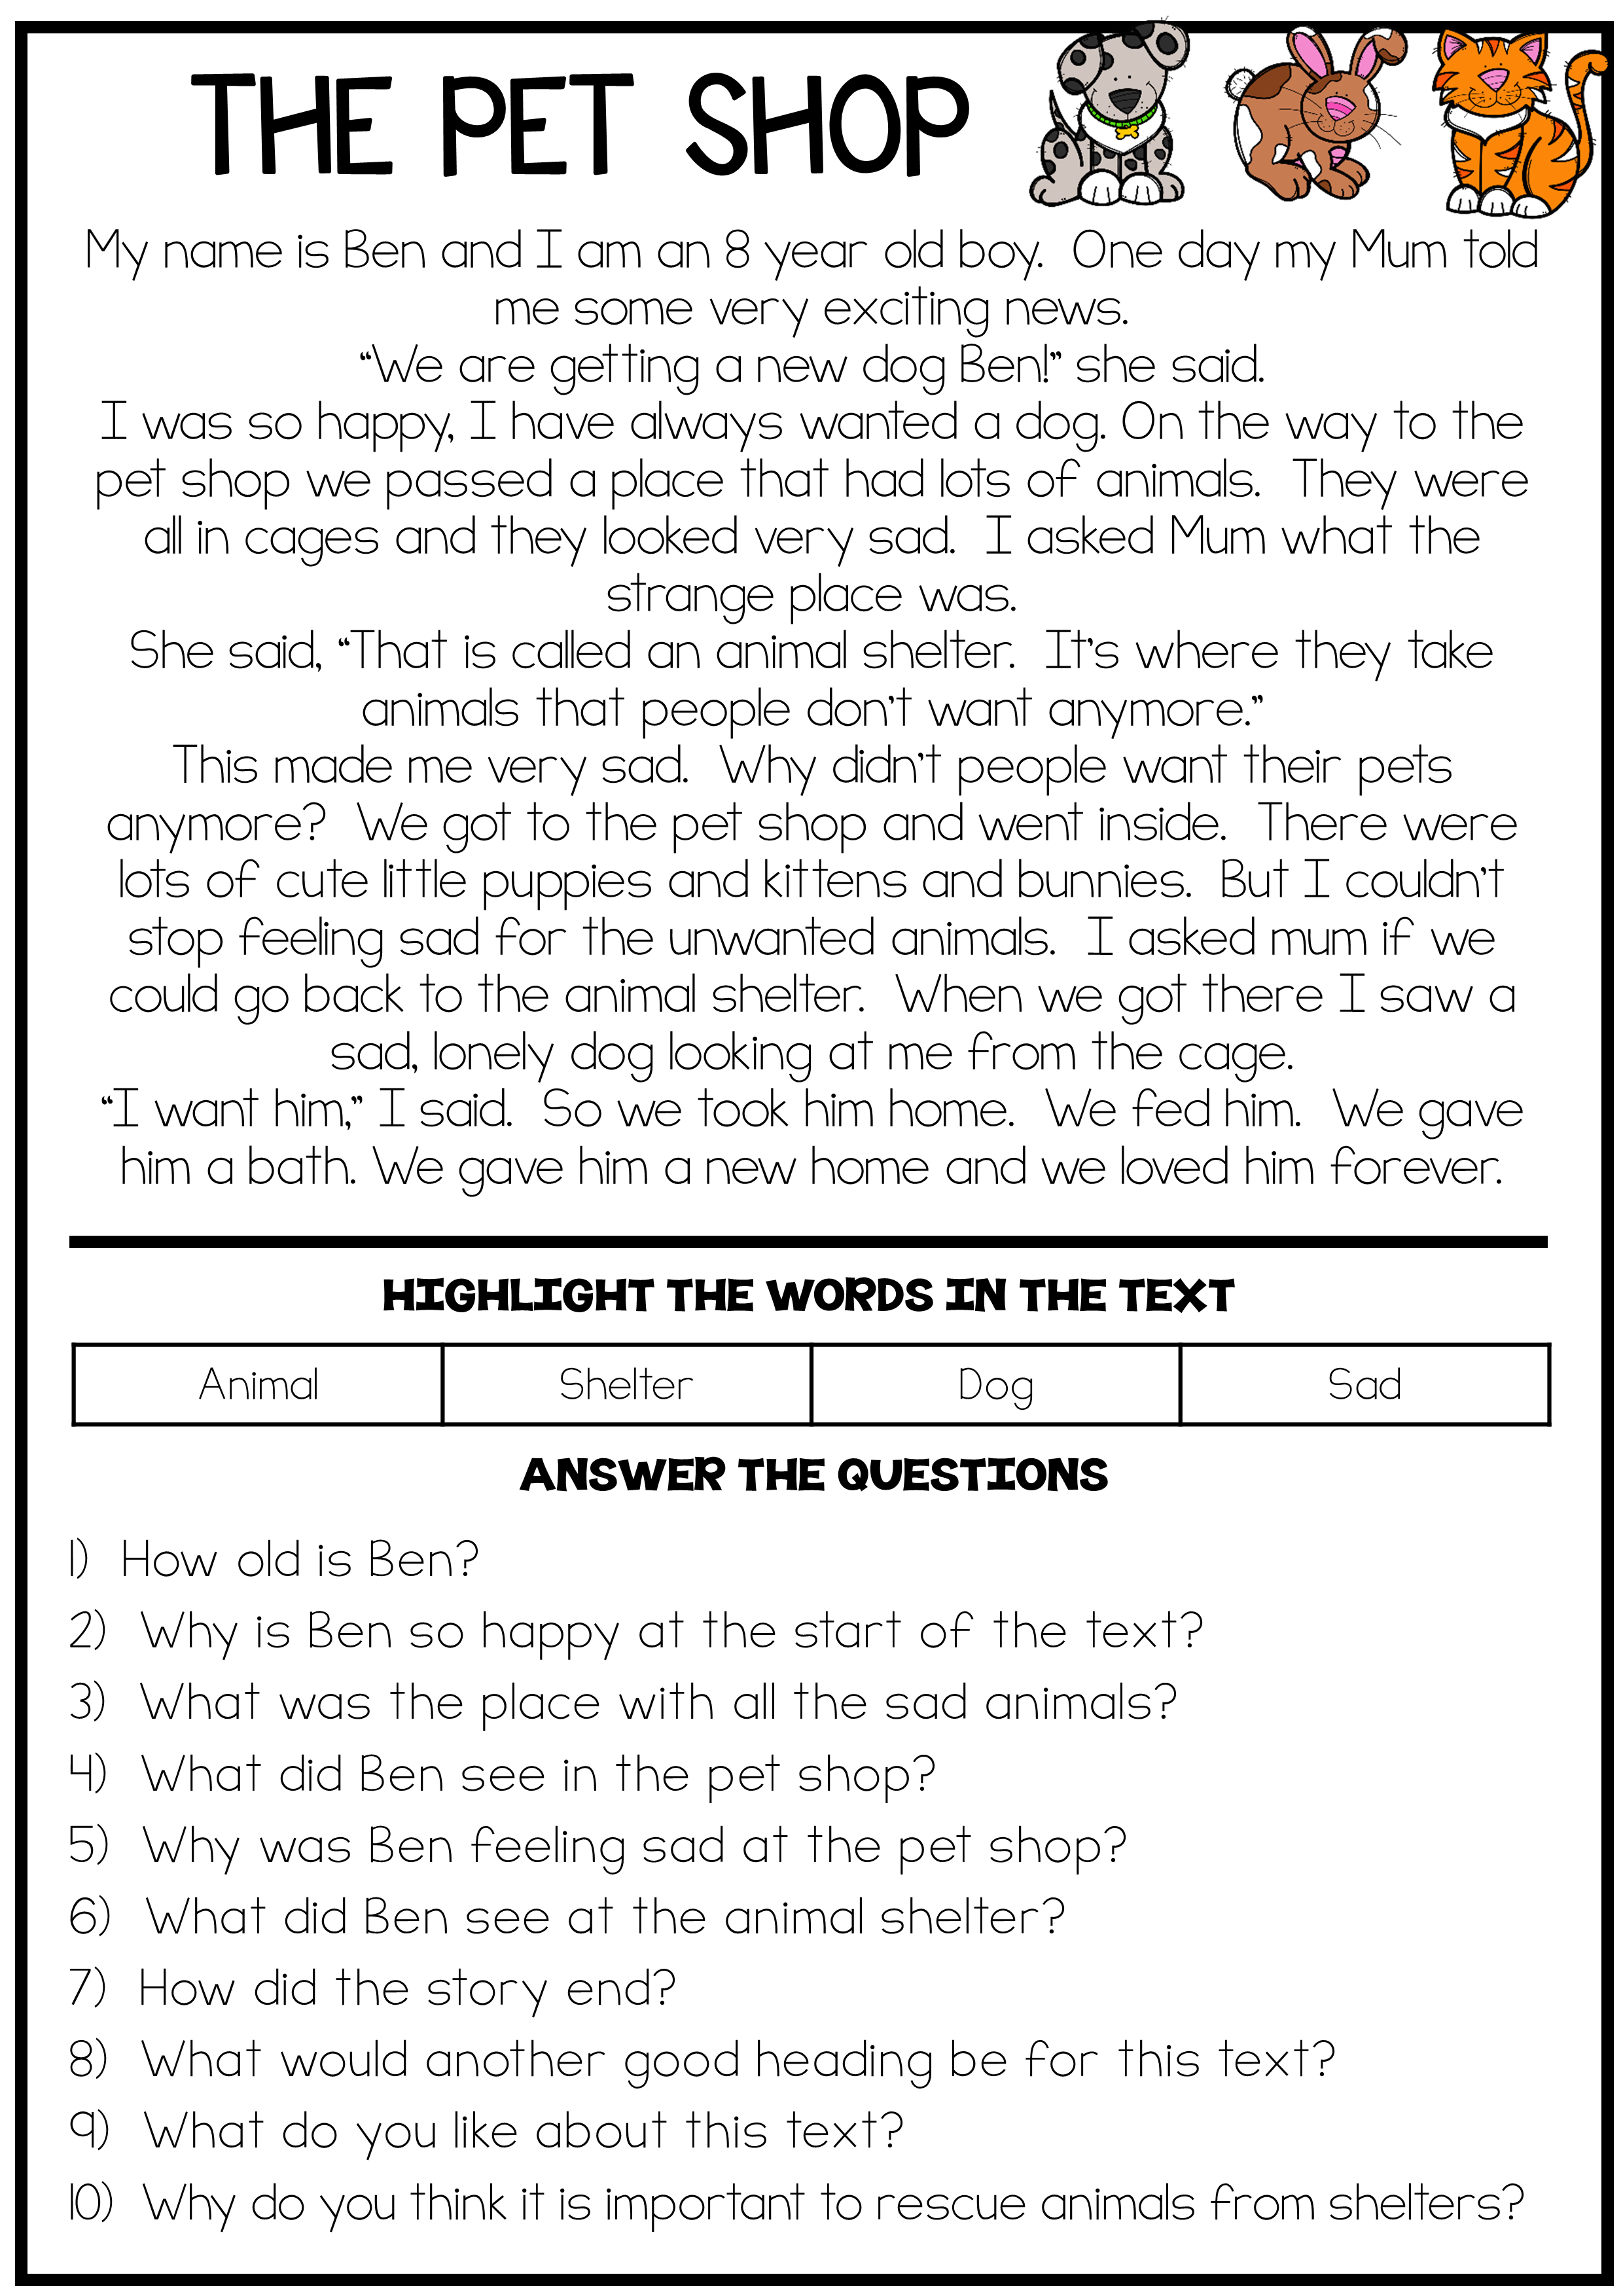 This Reading Comprehension Passage Is Designed To Help Children To 